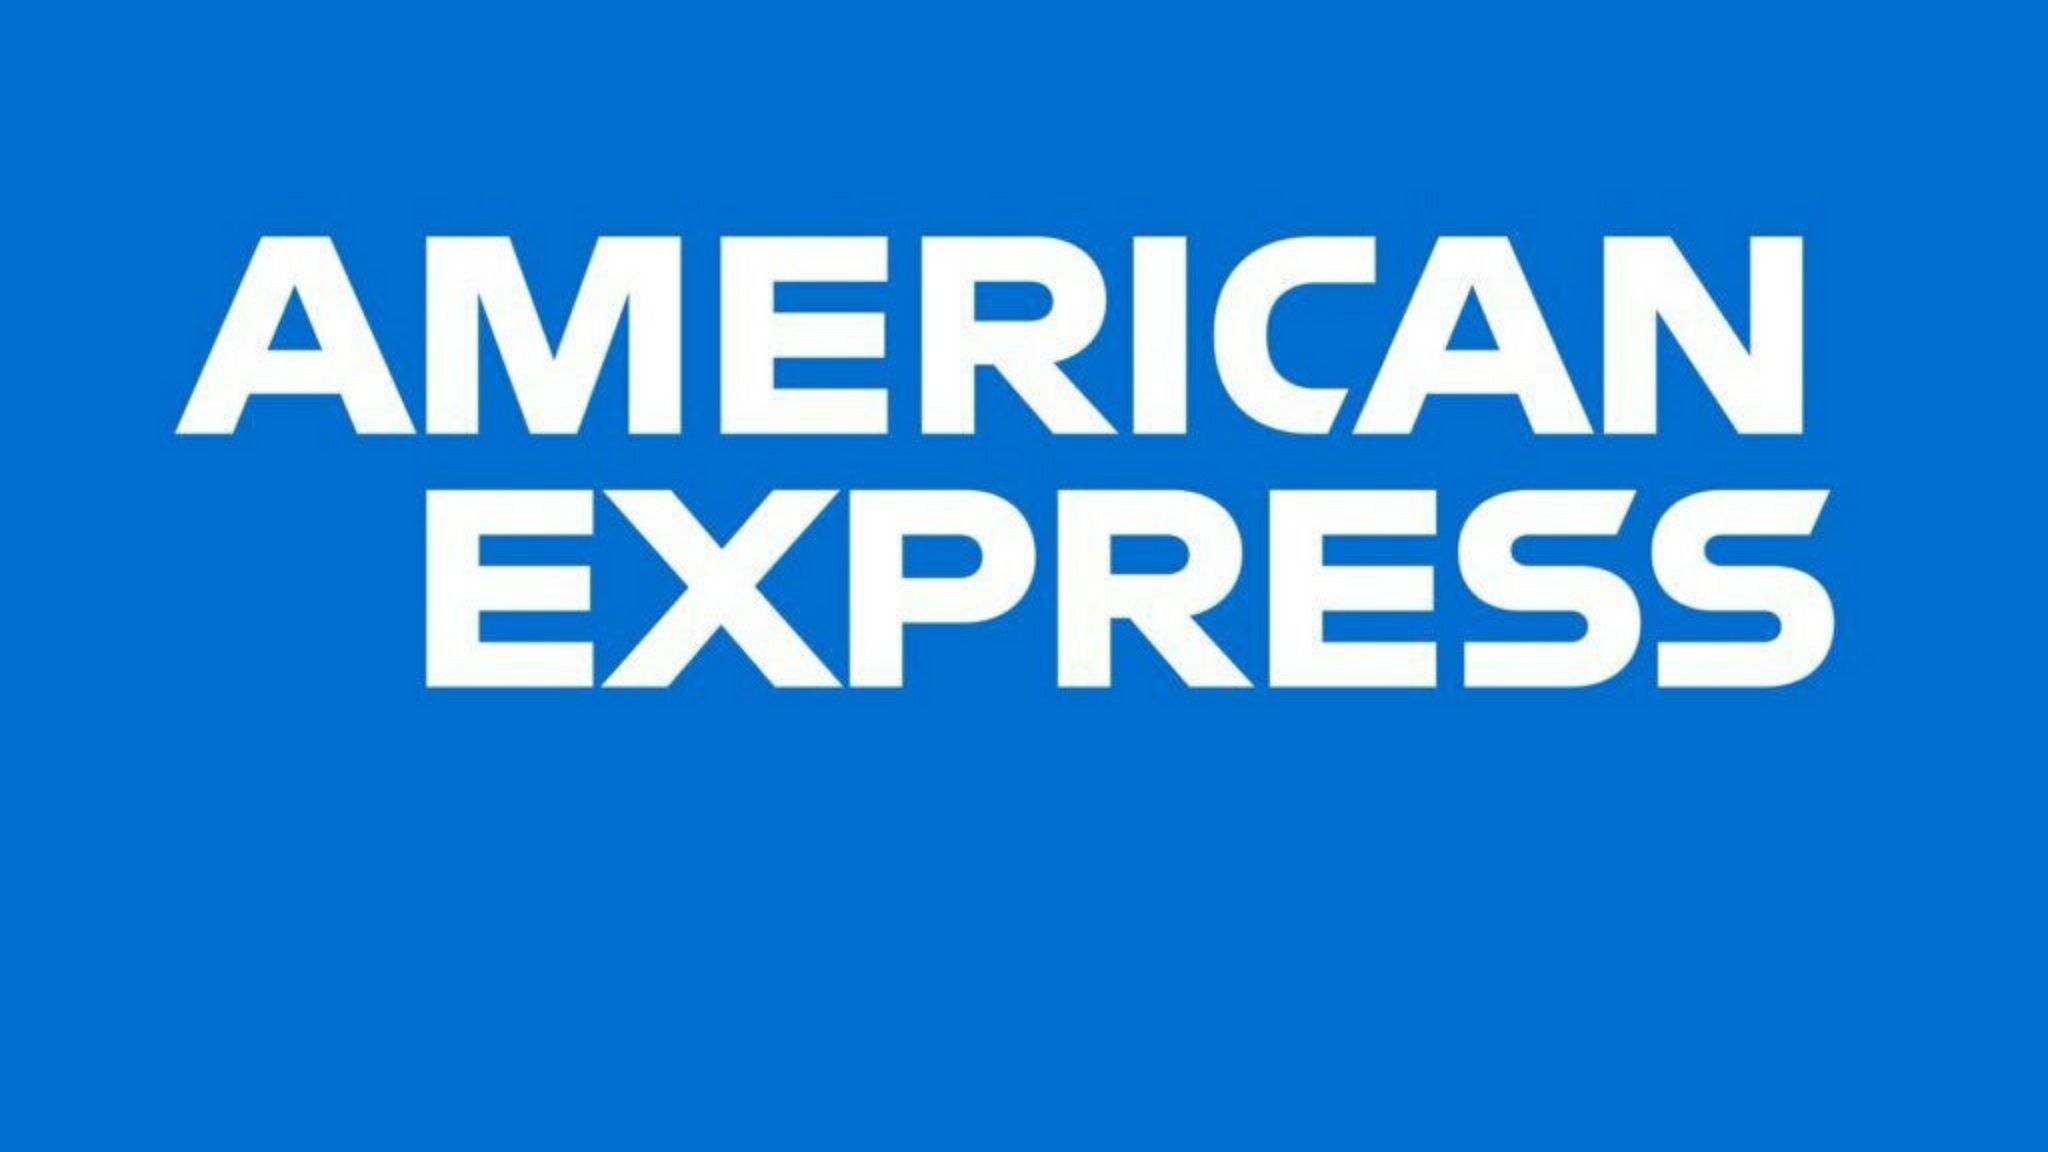 Banking Tips and Tricks: American Express